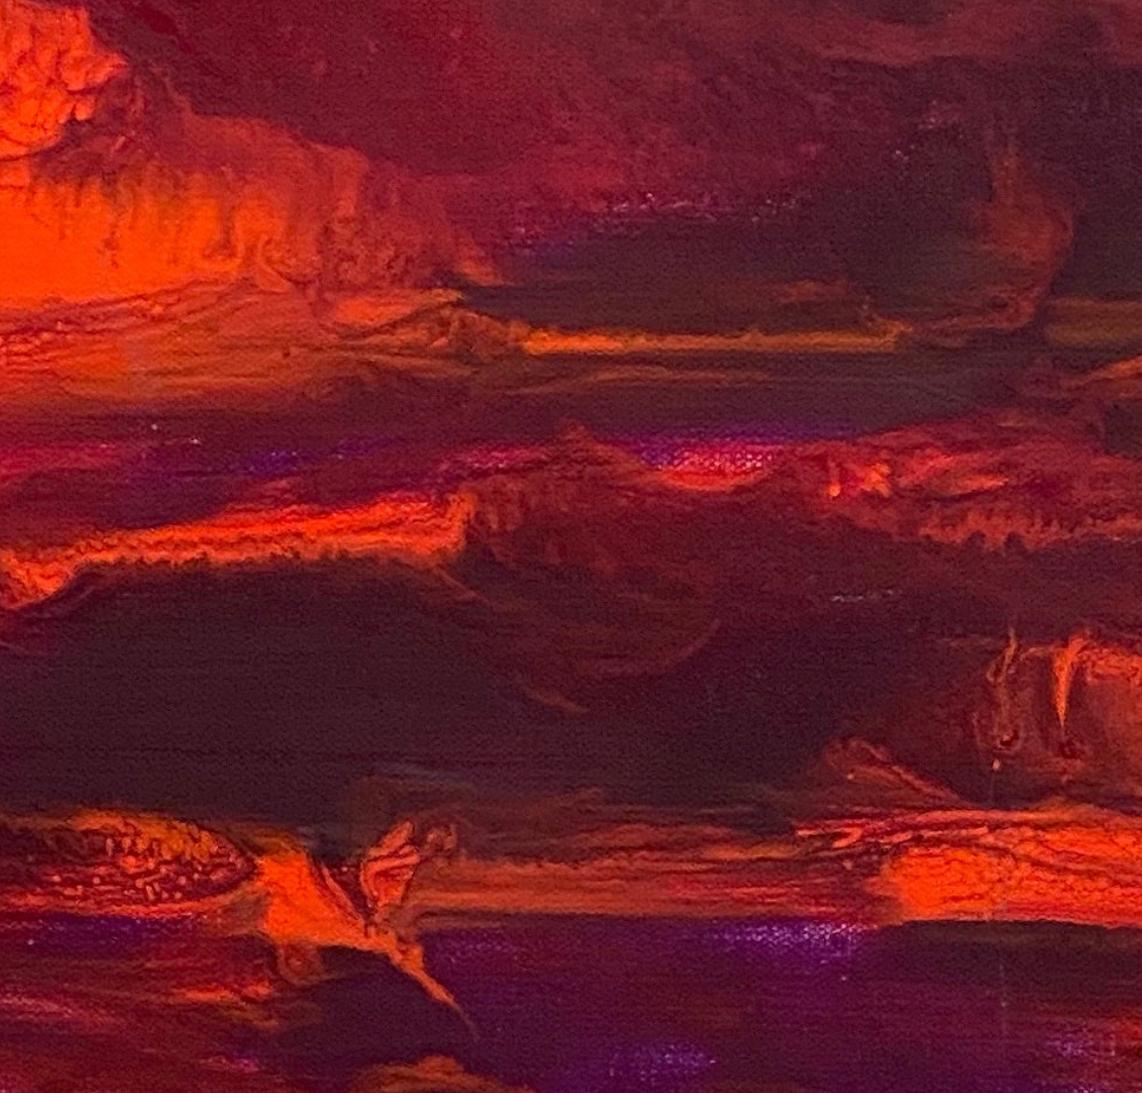 Sailor's delight, Contemporary painting with bold reds, oranges and violets - Abstract Impressionist Painting by Juanita Bellavance 